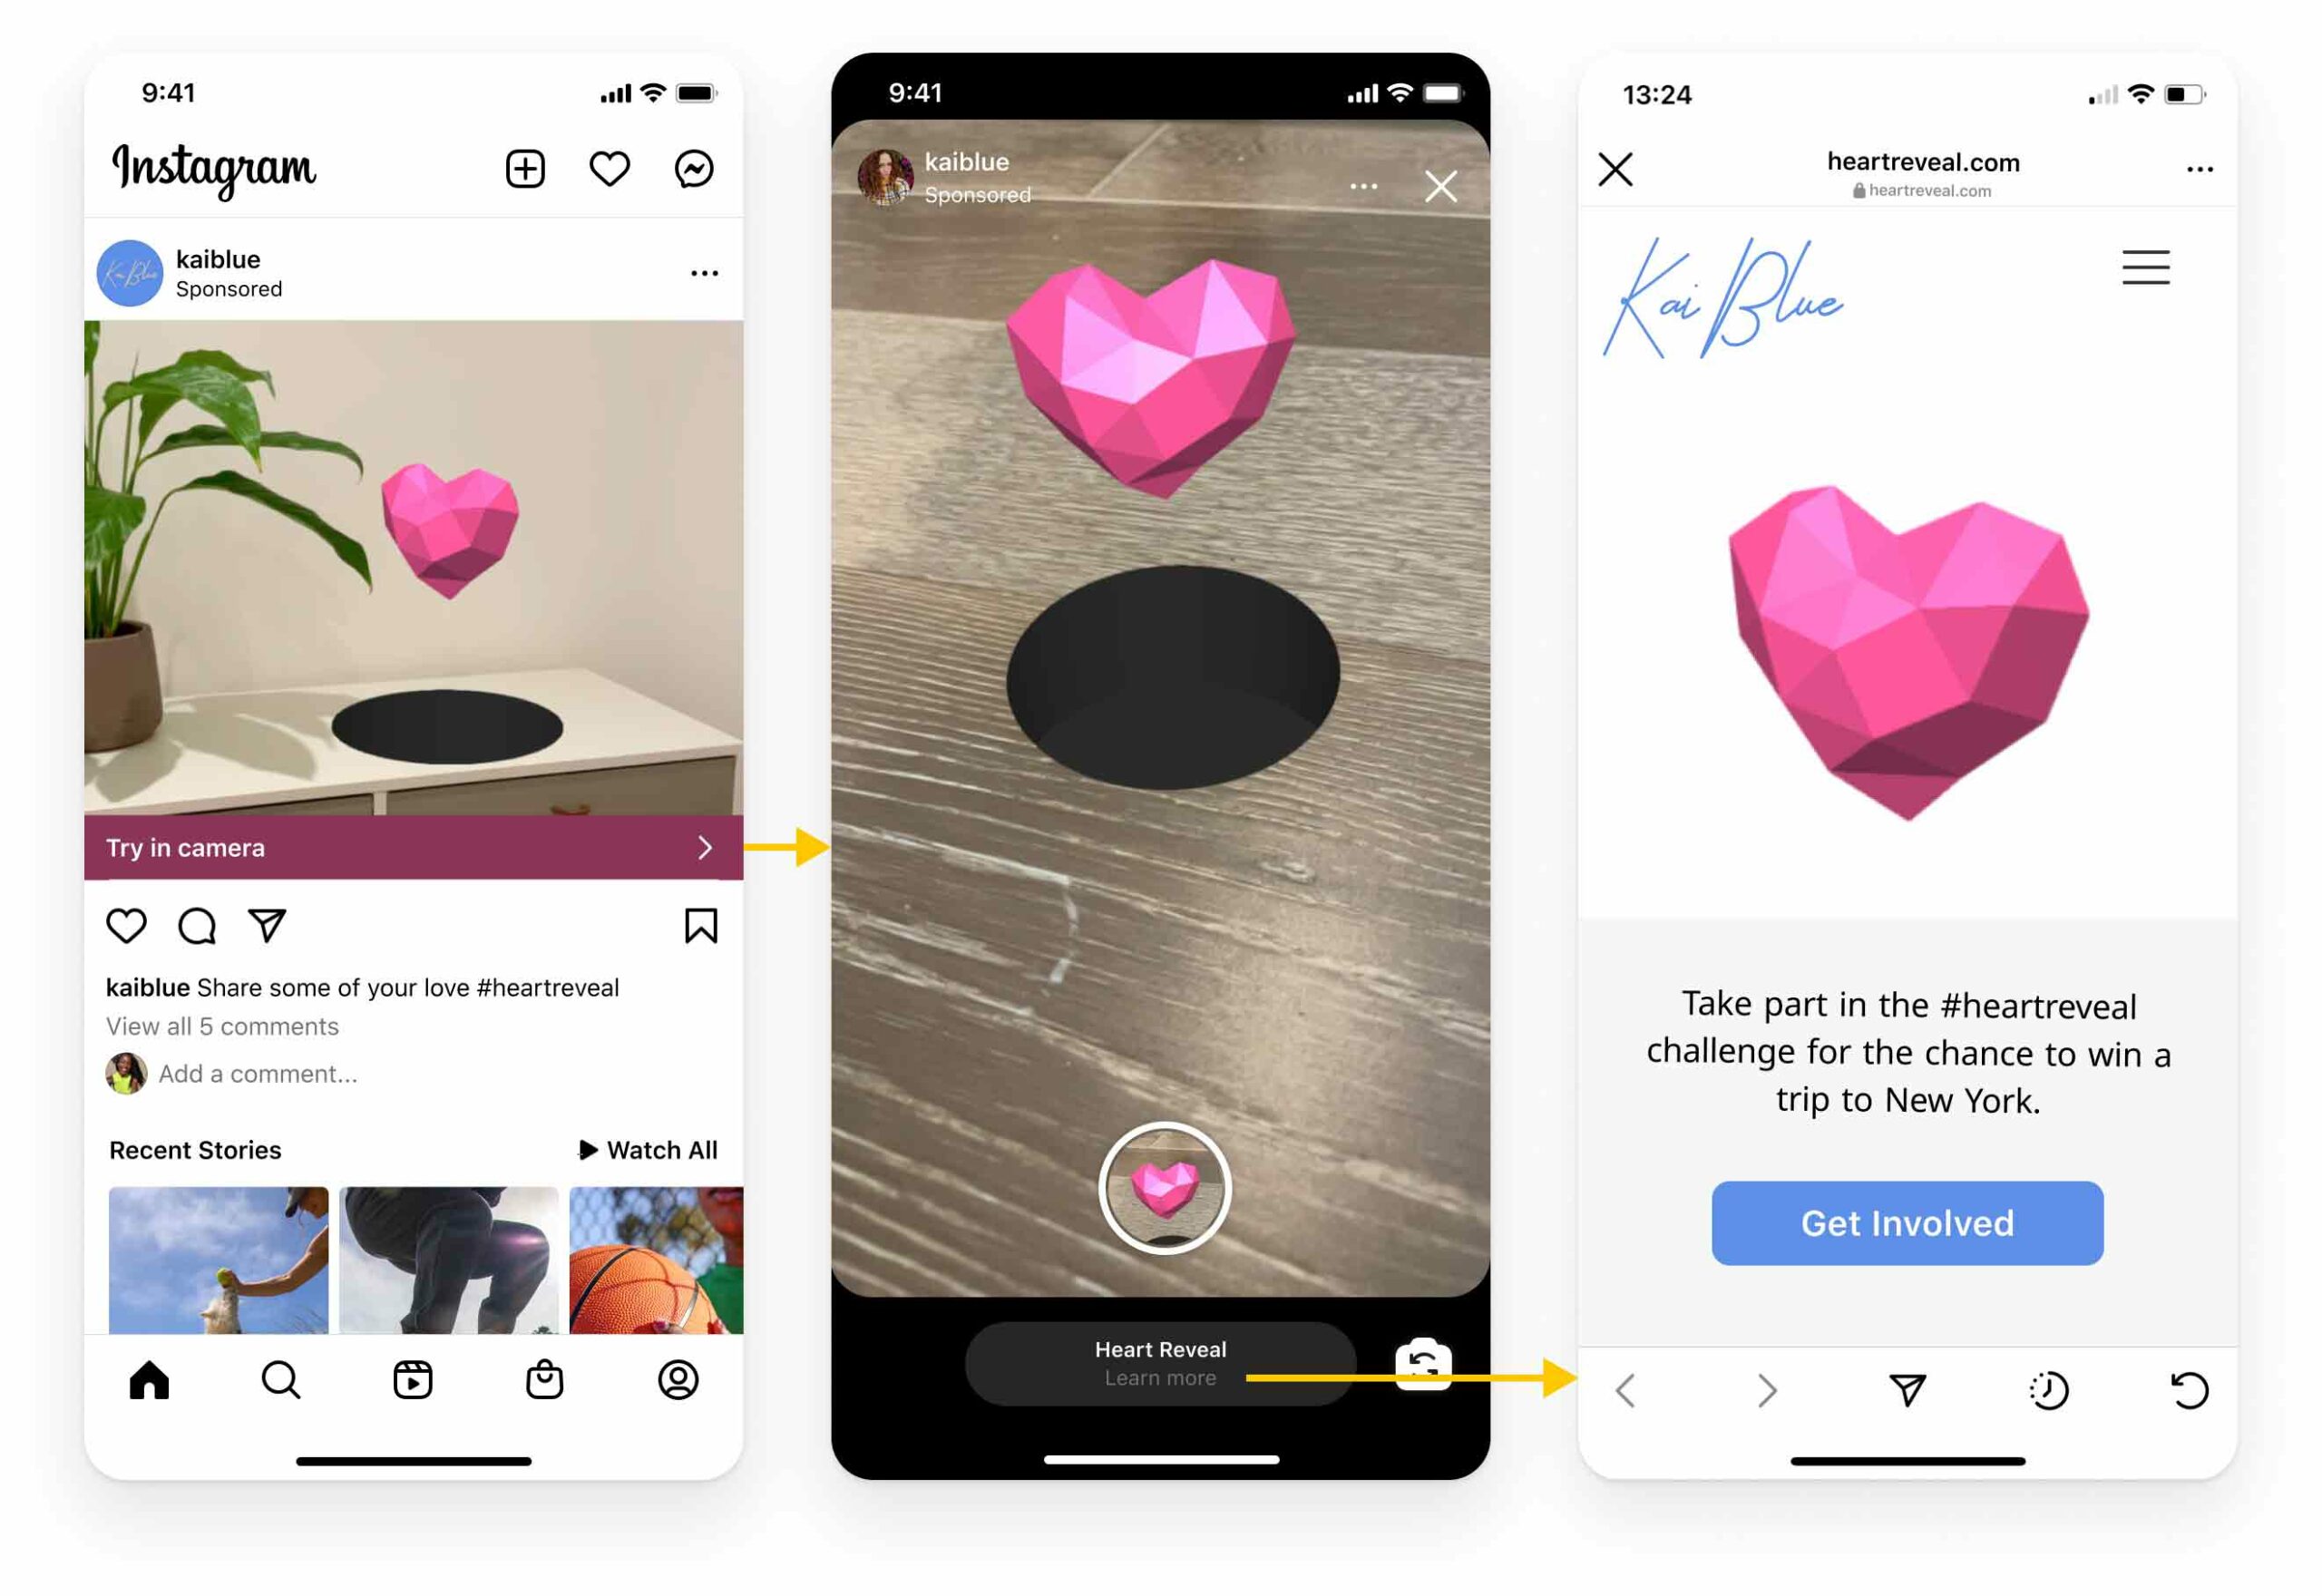 Instagram is now putting ads on your profile feed